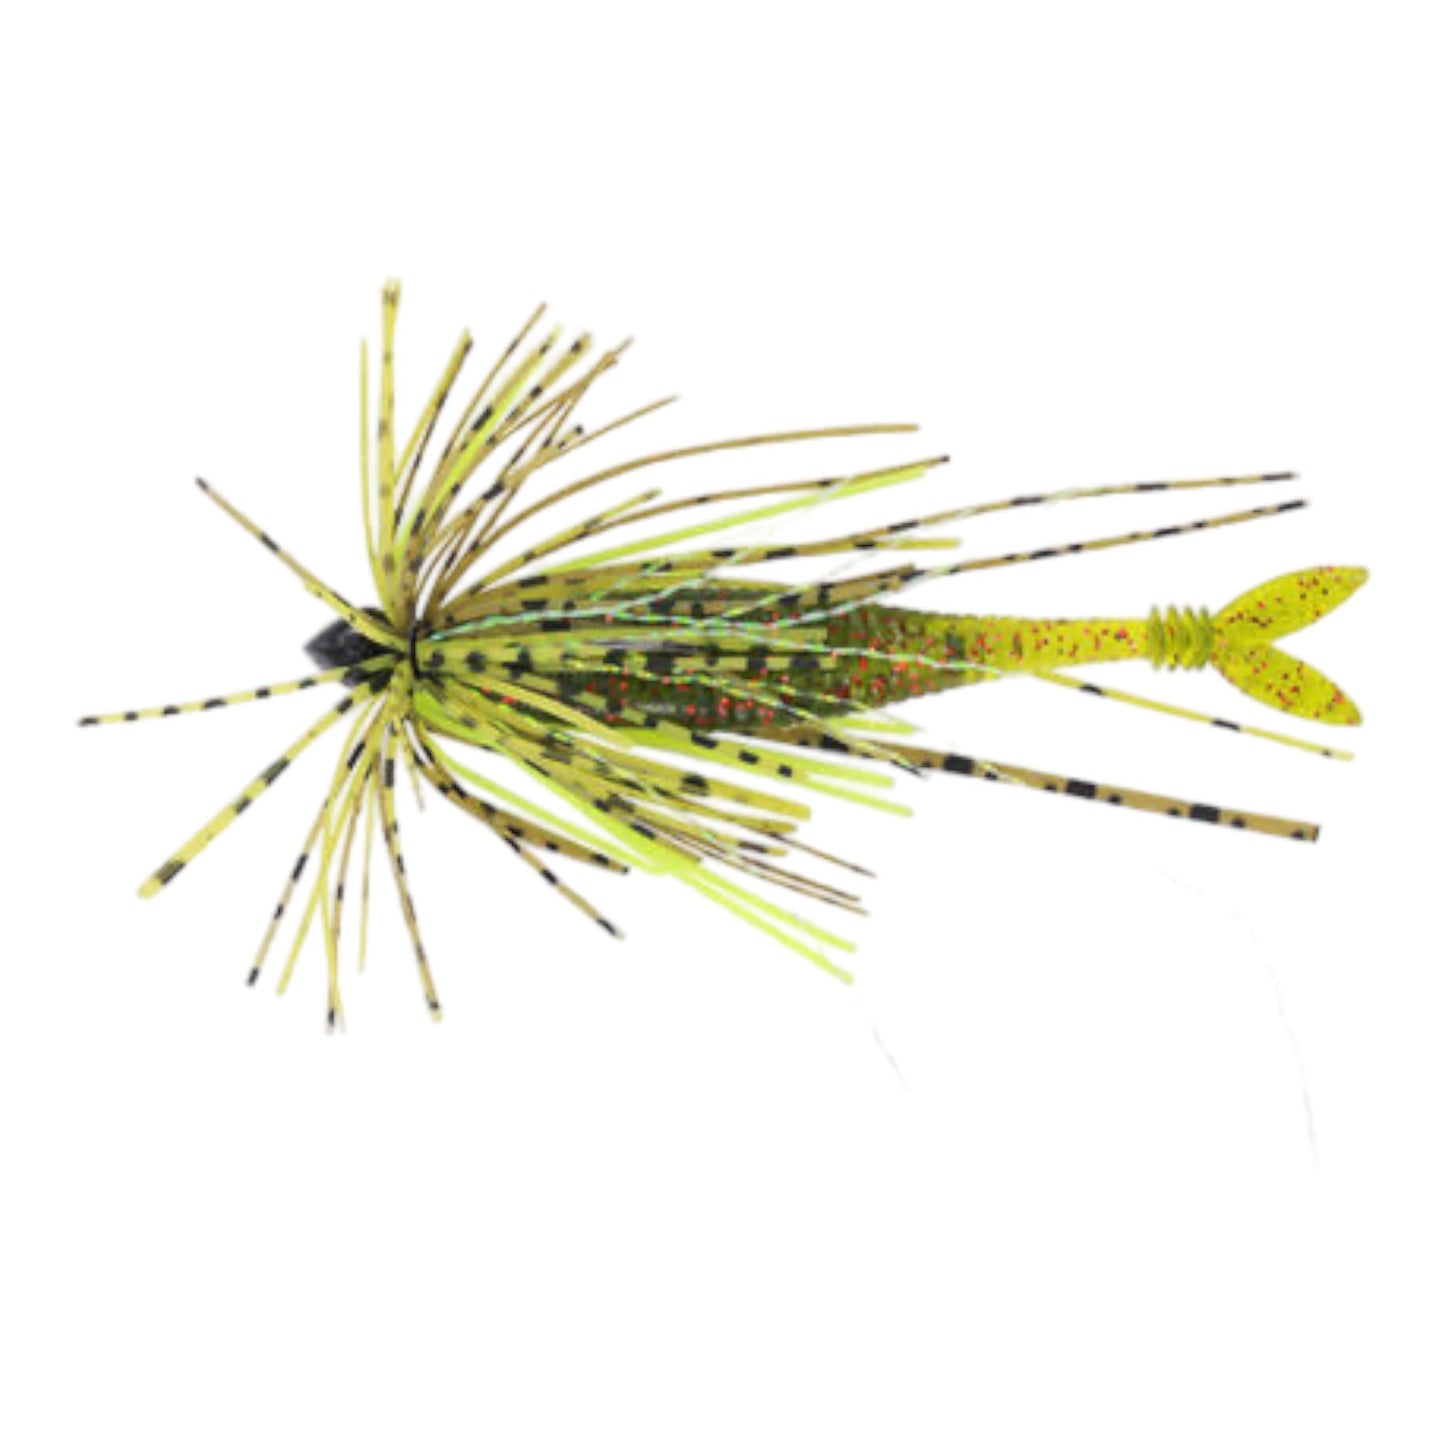 DUO Realis Small Rubber Jig